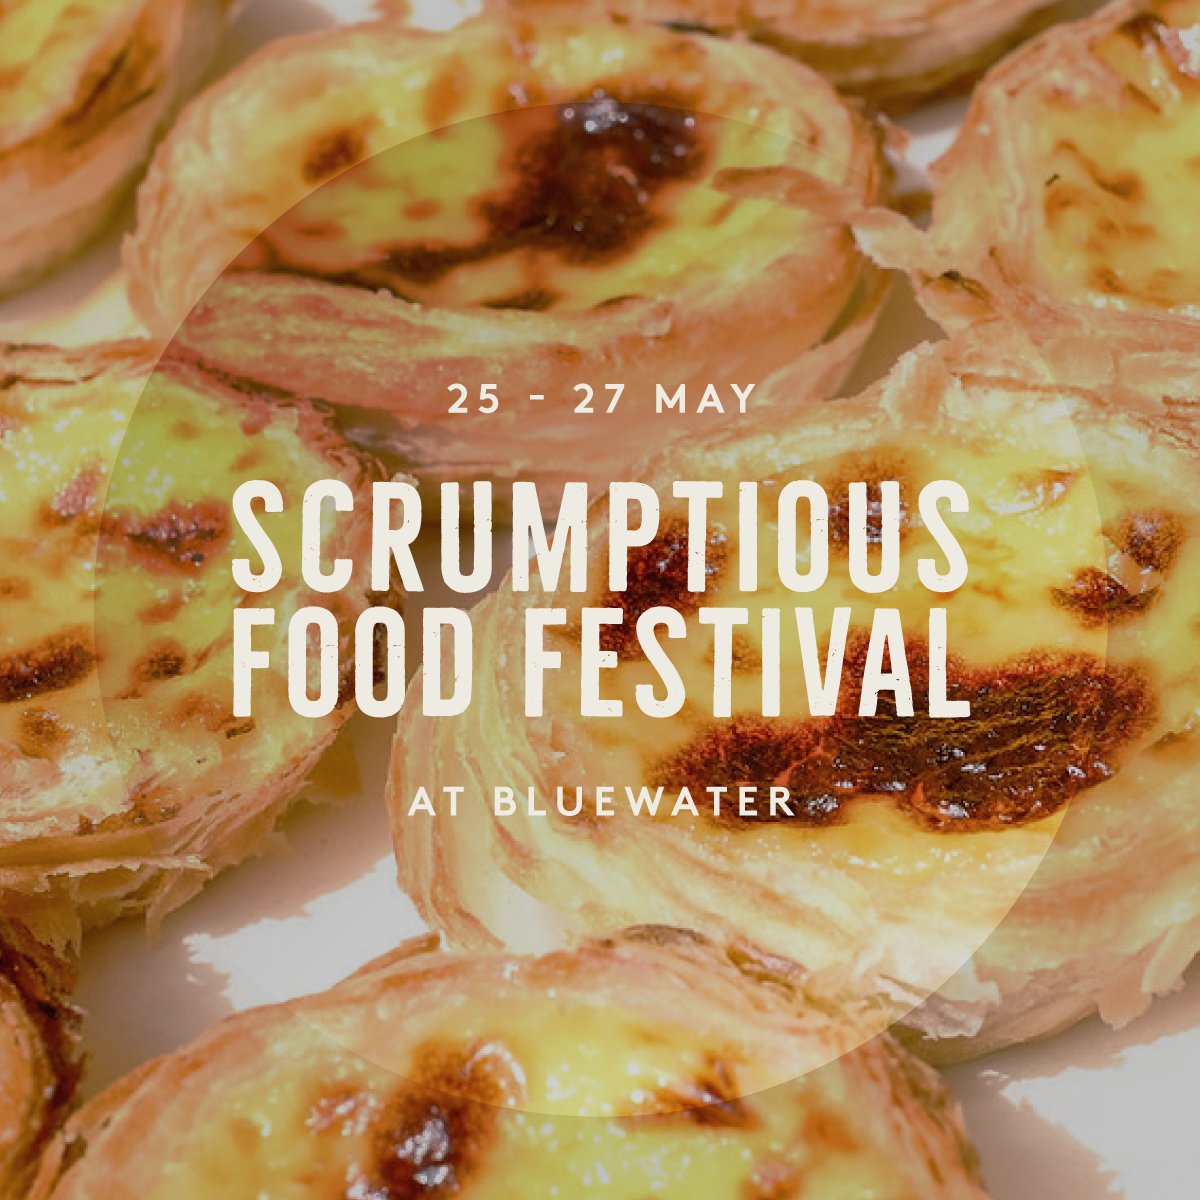 Ready for a foodie extravaganza? 🤤 From 25th-27th May, we're hosting our first ever food and drinks festival in collaboration with Scrumptious Food Festivals! Tickets are just £3, so grab yours today 👉 scrumptiousfoodfestivals.co.uk